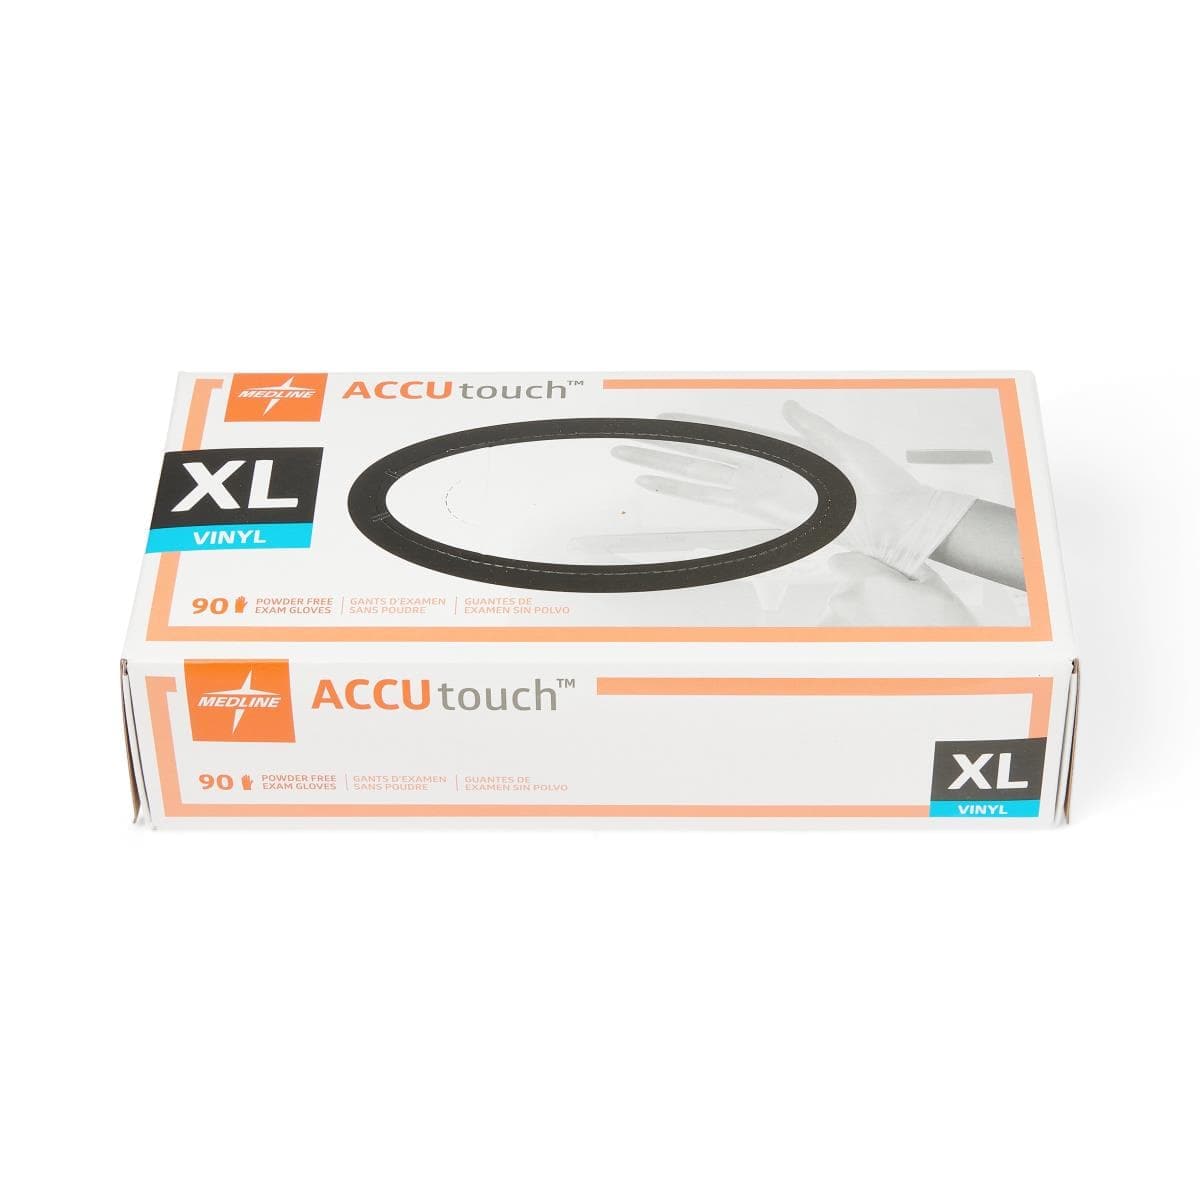 Medline XL / Case of 900 Medline Accutouch Synthetic Exam Gloves